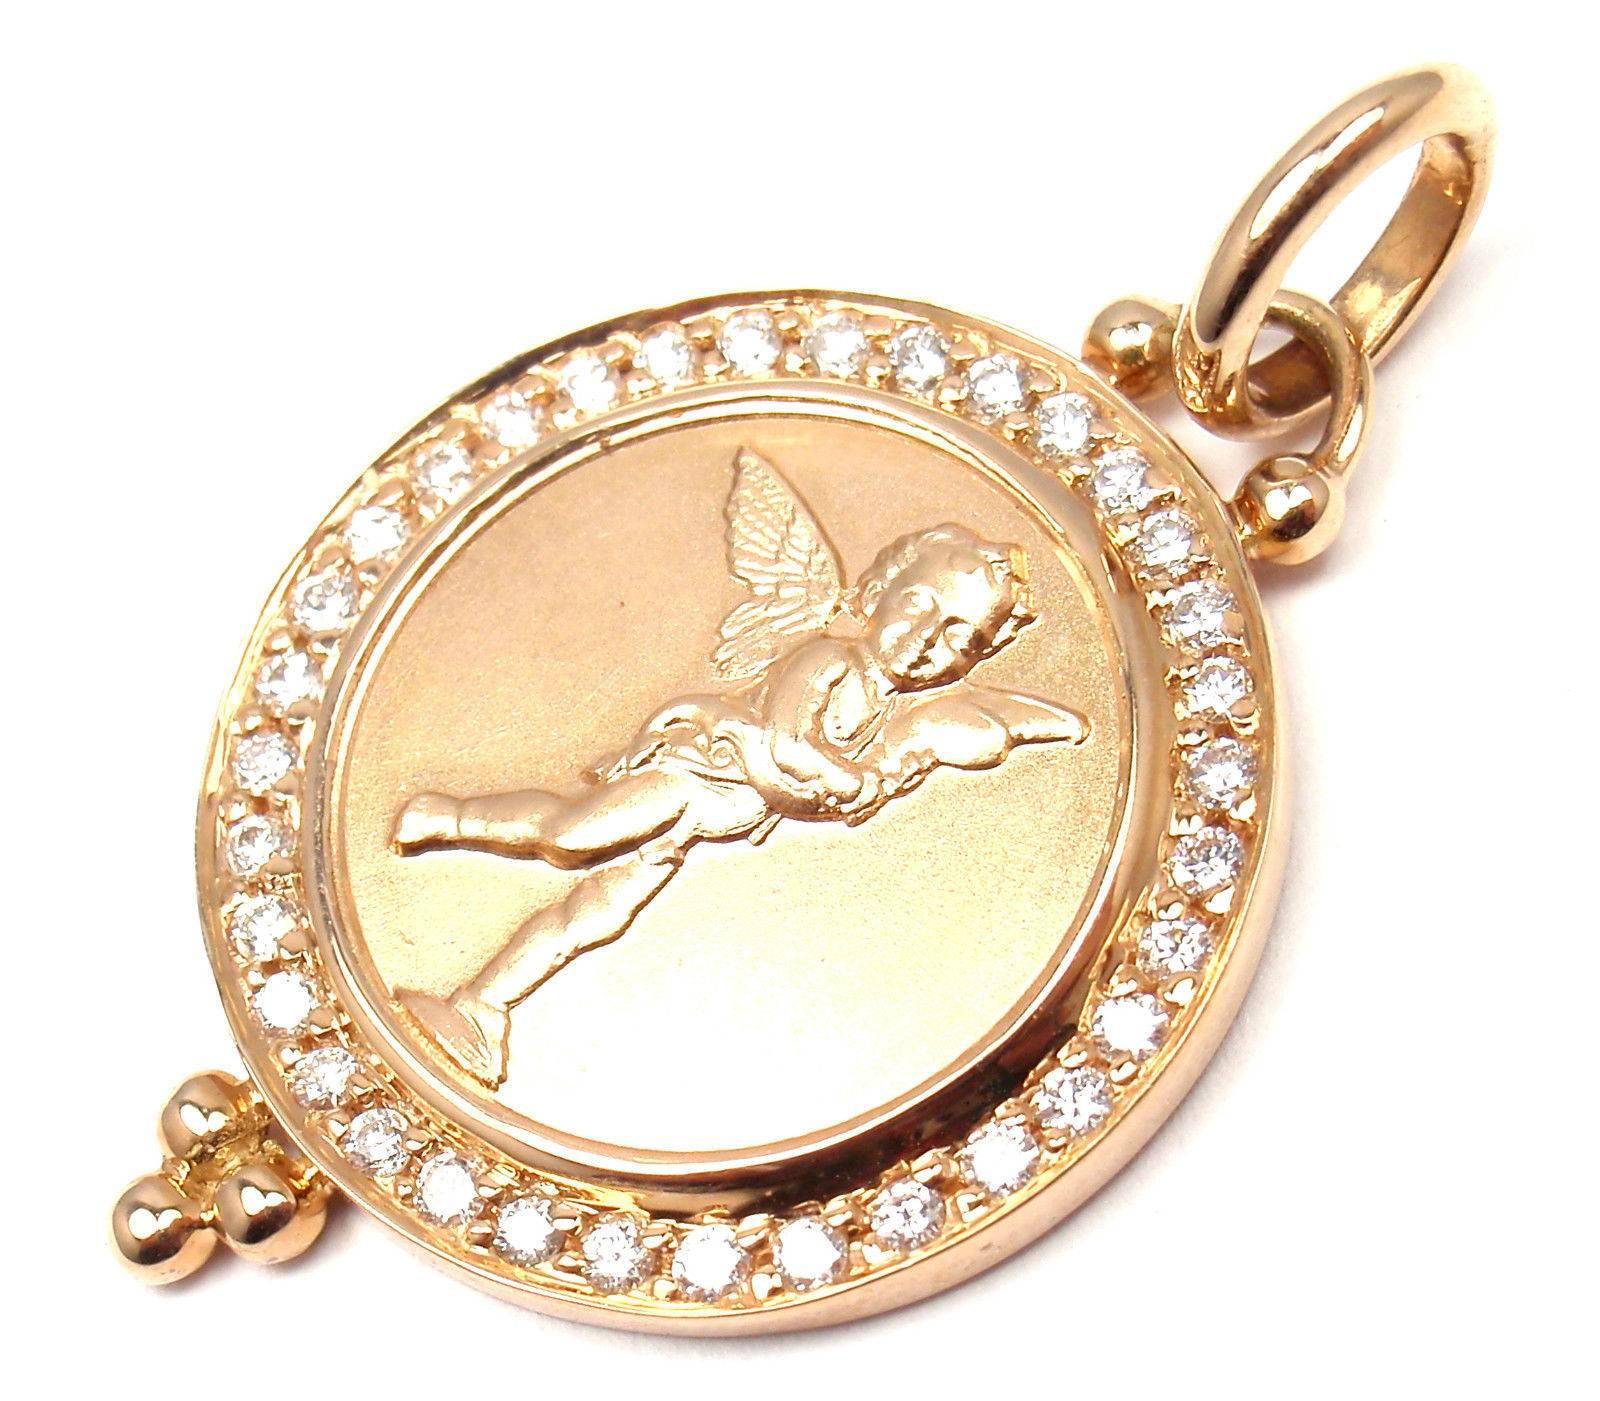 18k Rose Gold Diamond Cherub Angels Pendant by Temple St Clair. 
This piece comes with a pouch. 
With Round Diamonds total weight (0.34ctw)

Details: 
Measurements: 21mm in diameter and 35mm in length with bail, 
7mm thick bale
Weight: 9